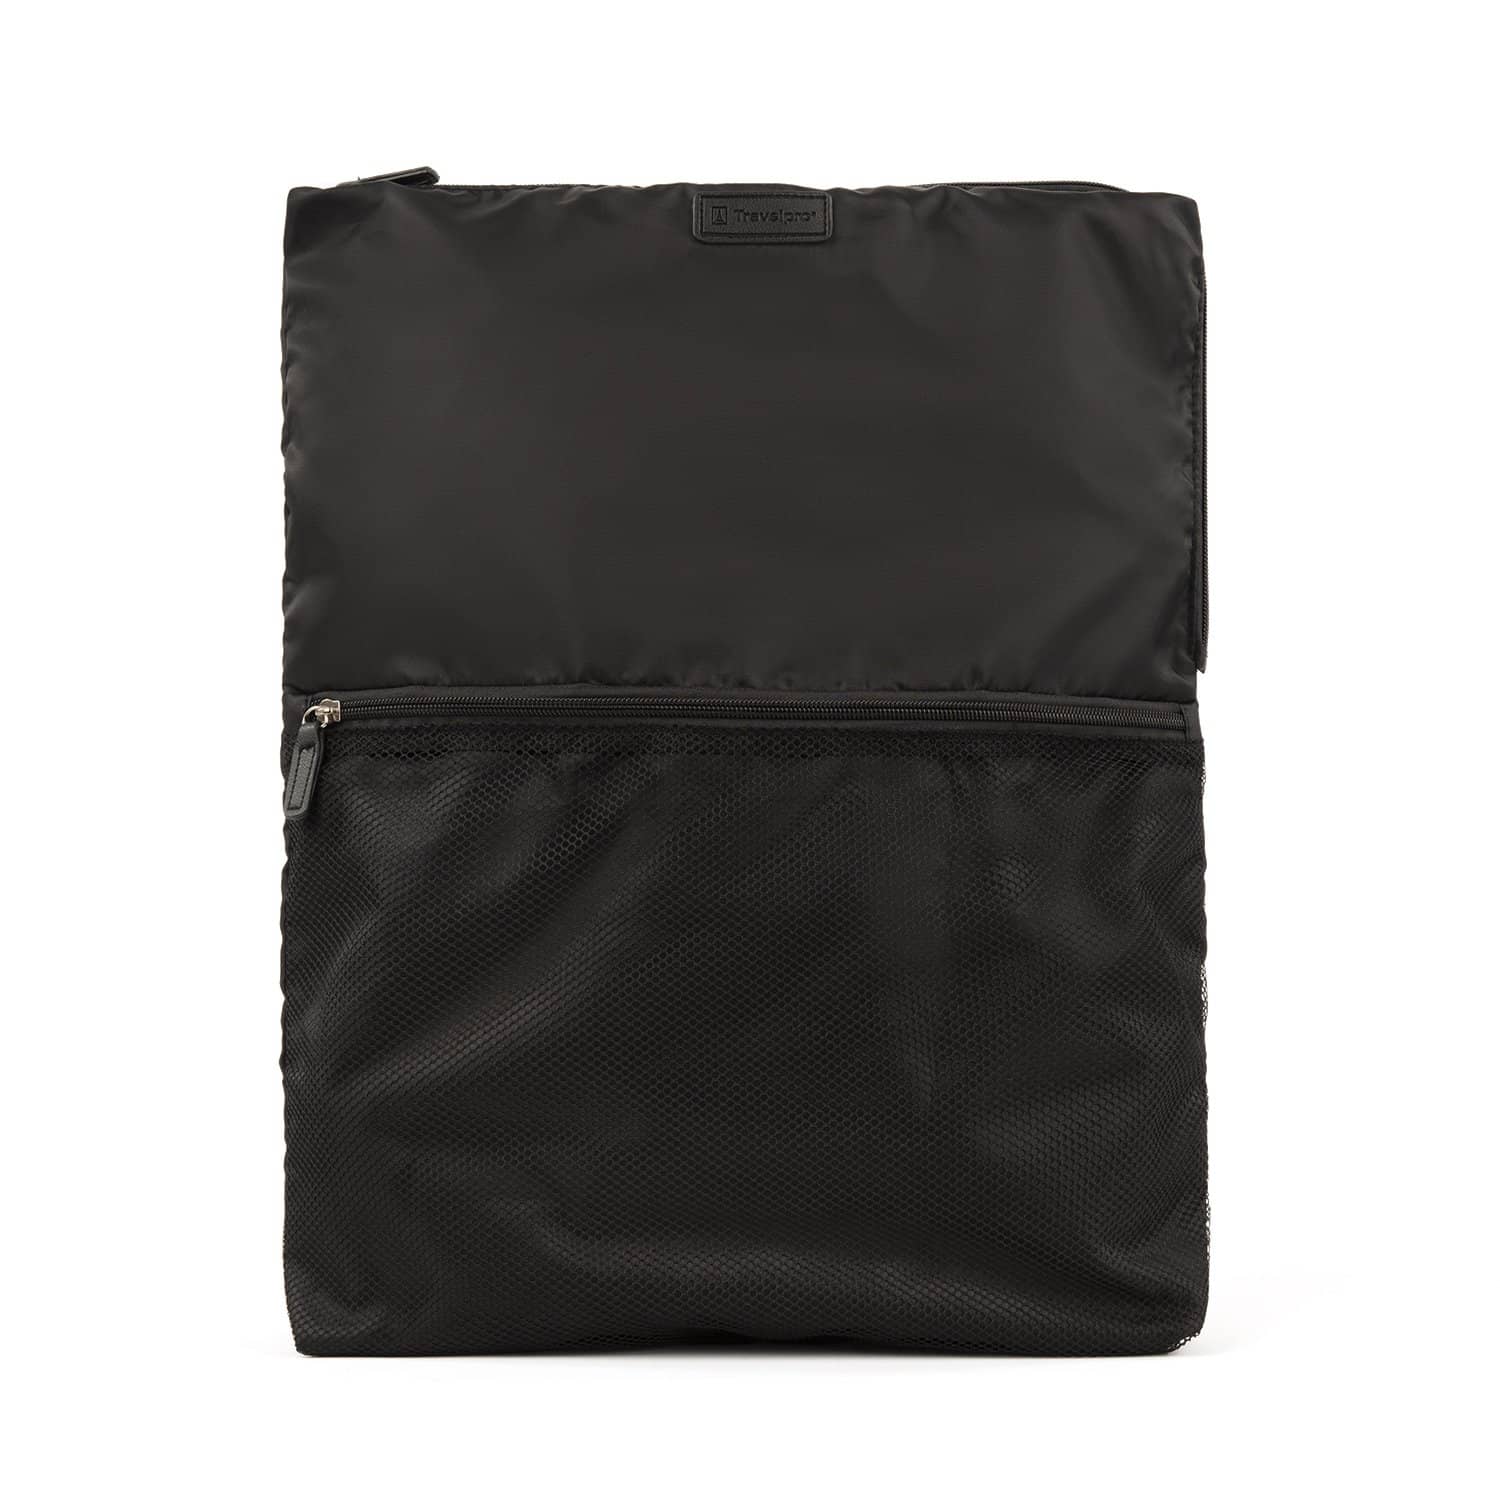 Travelpro Essentials Washable Travel Laundry Bag in Black